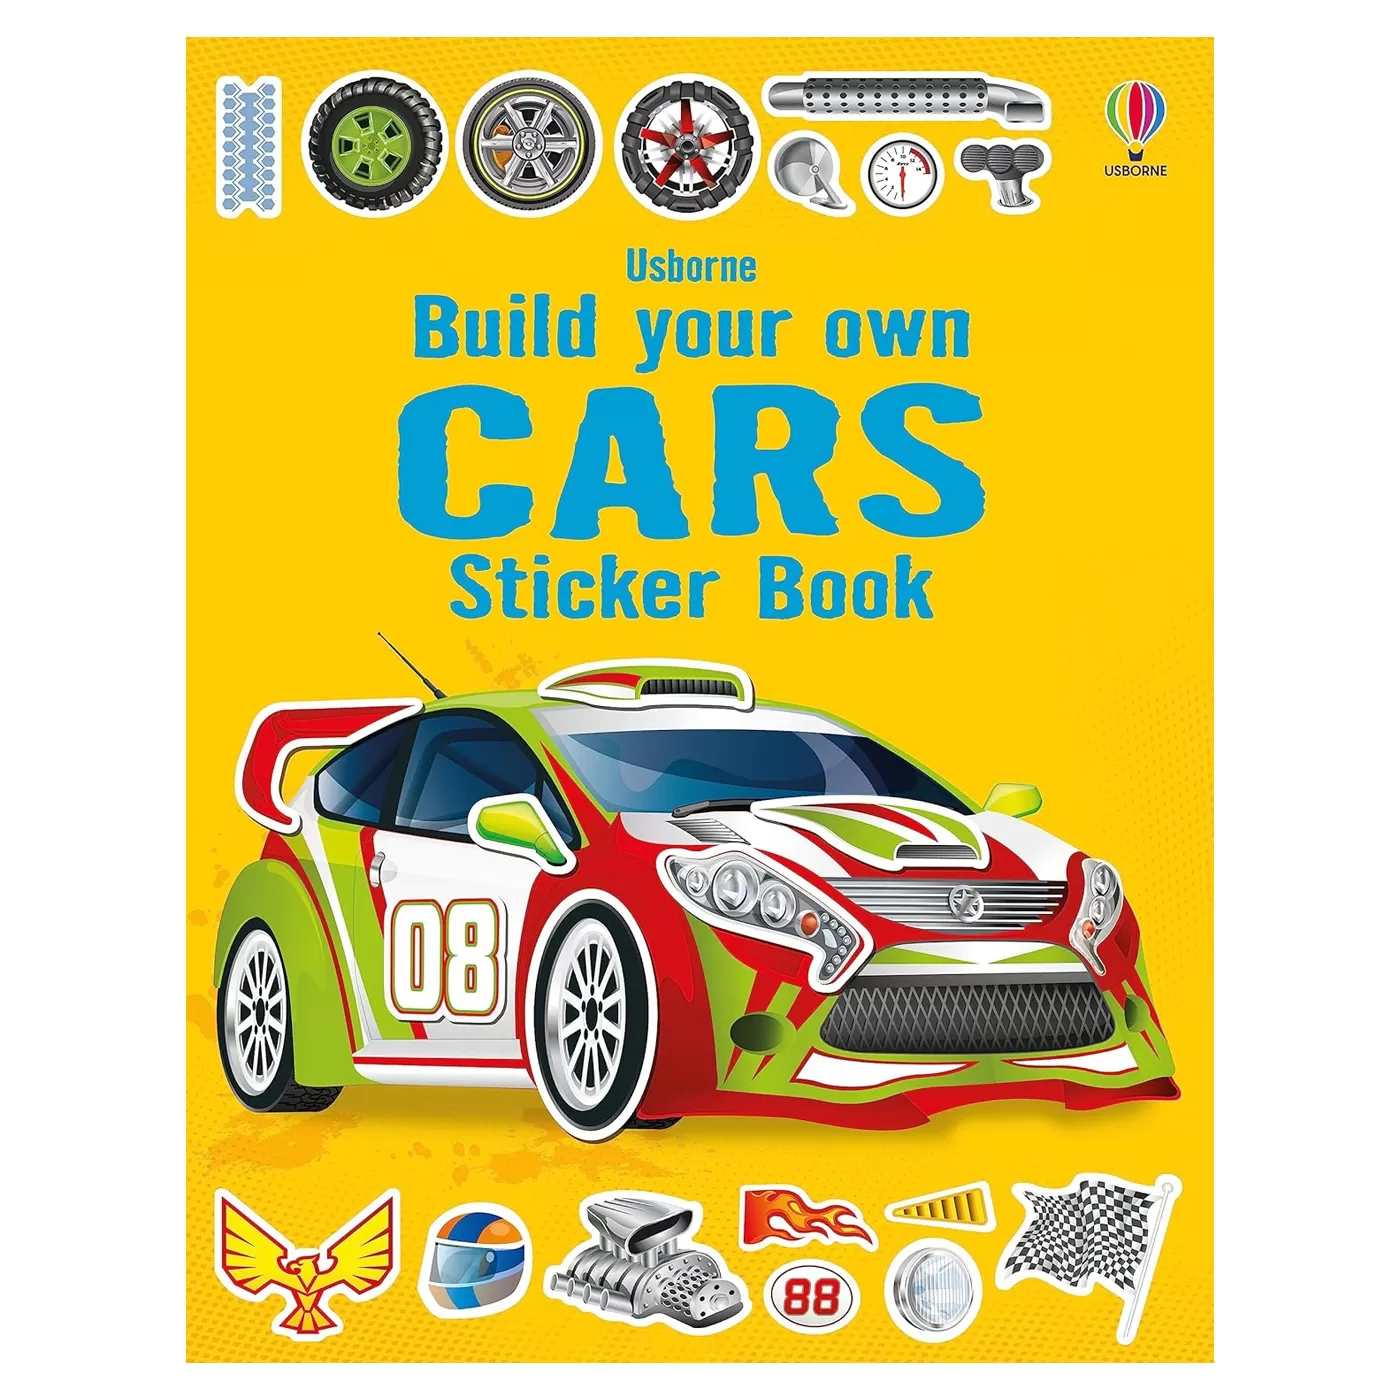  Build your own Cars Sticker Book